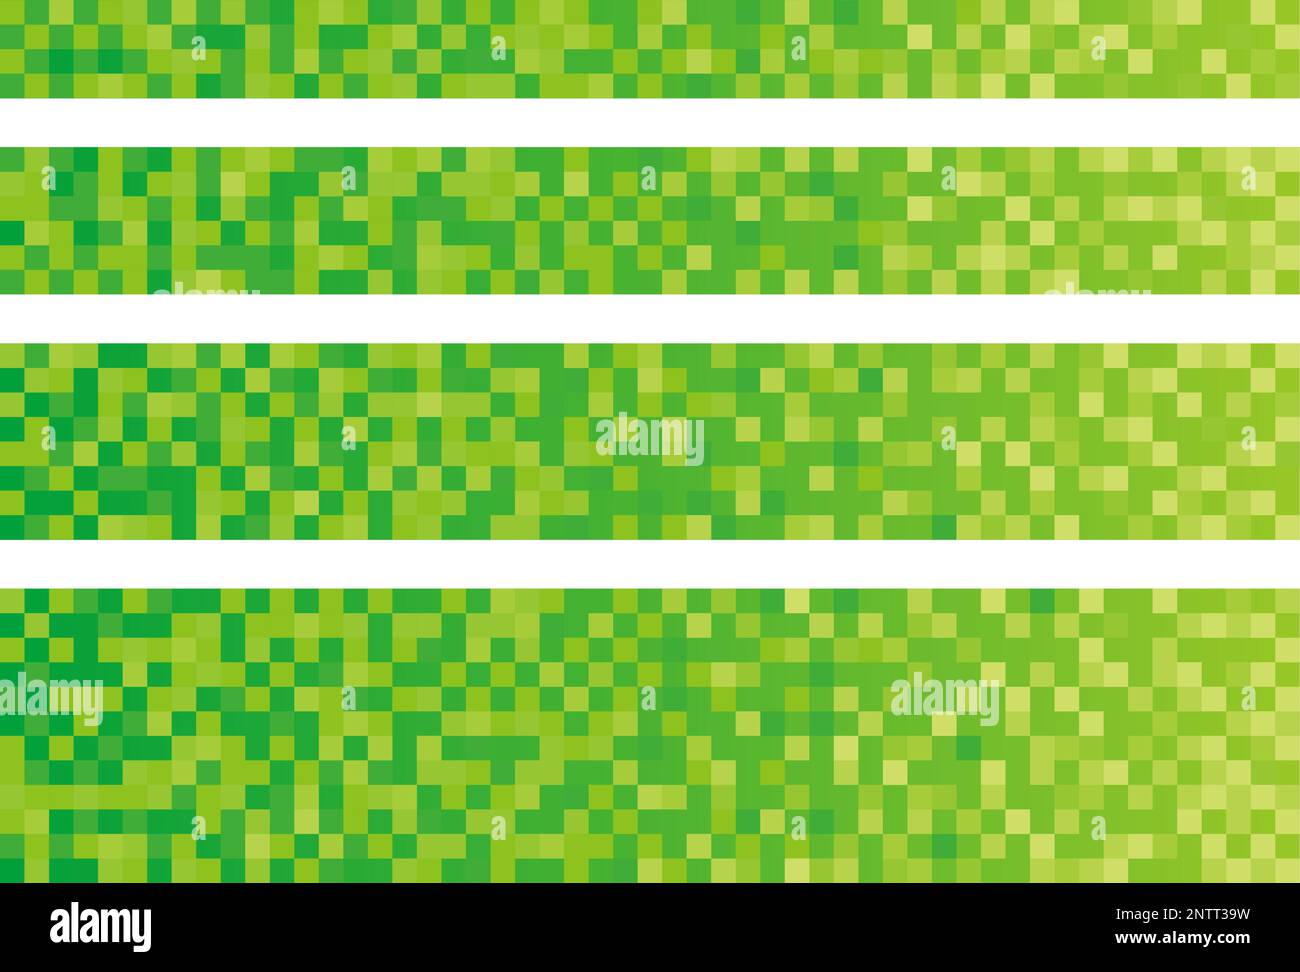 Vector Green Pixel Texture Illustration Set. Computer And Digital Technology Background. Stock Vector